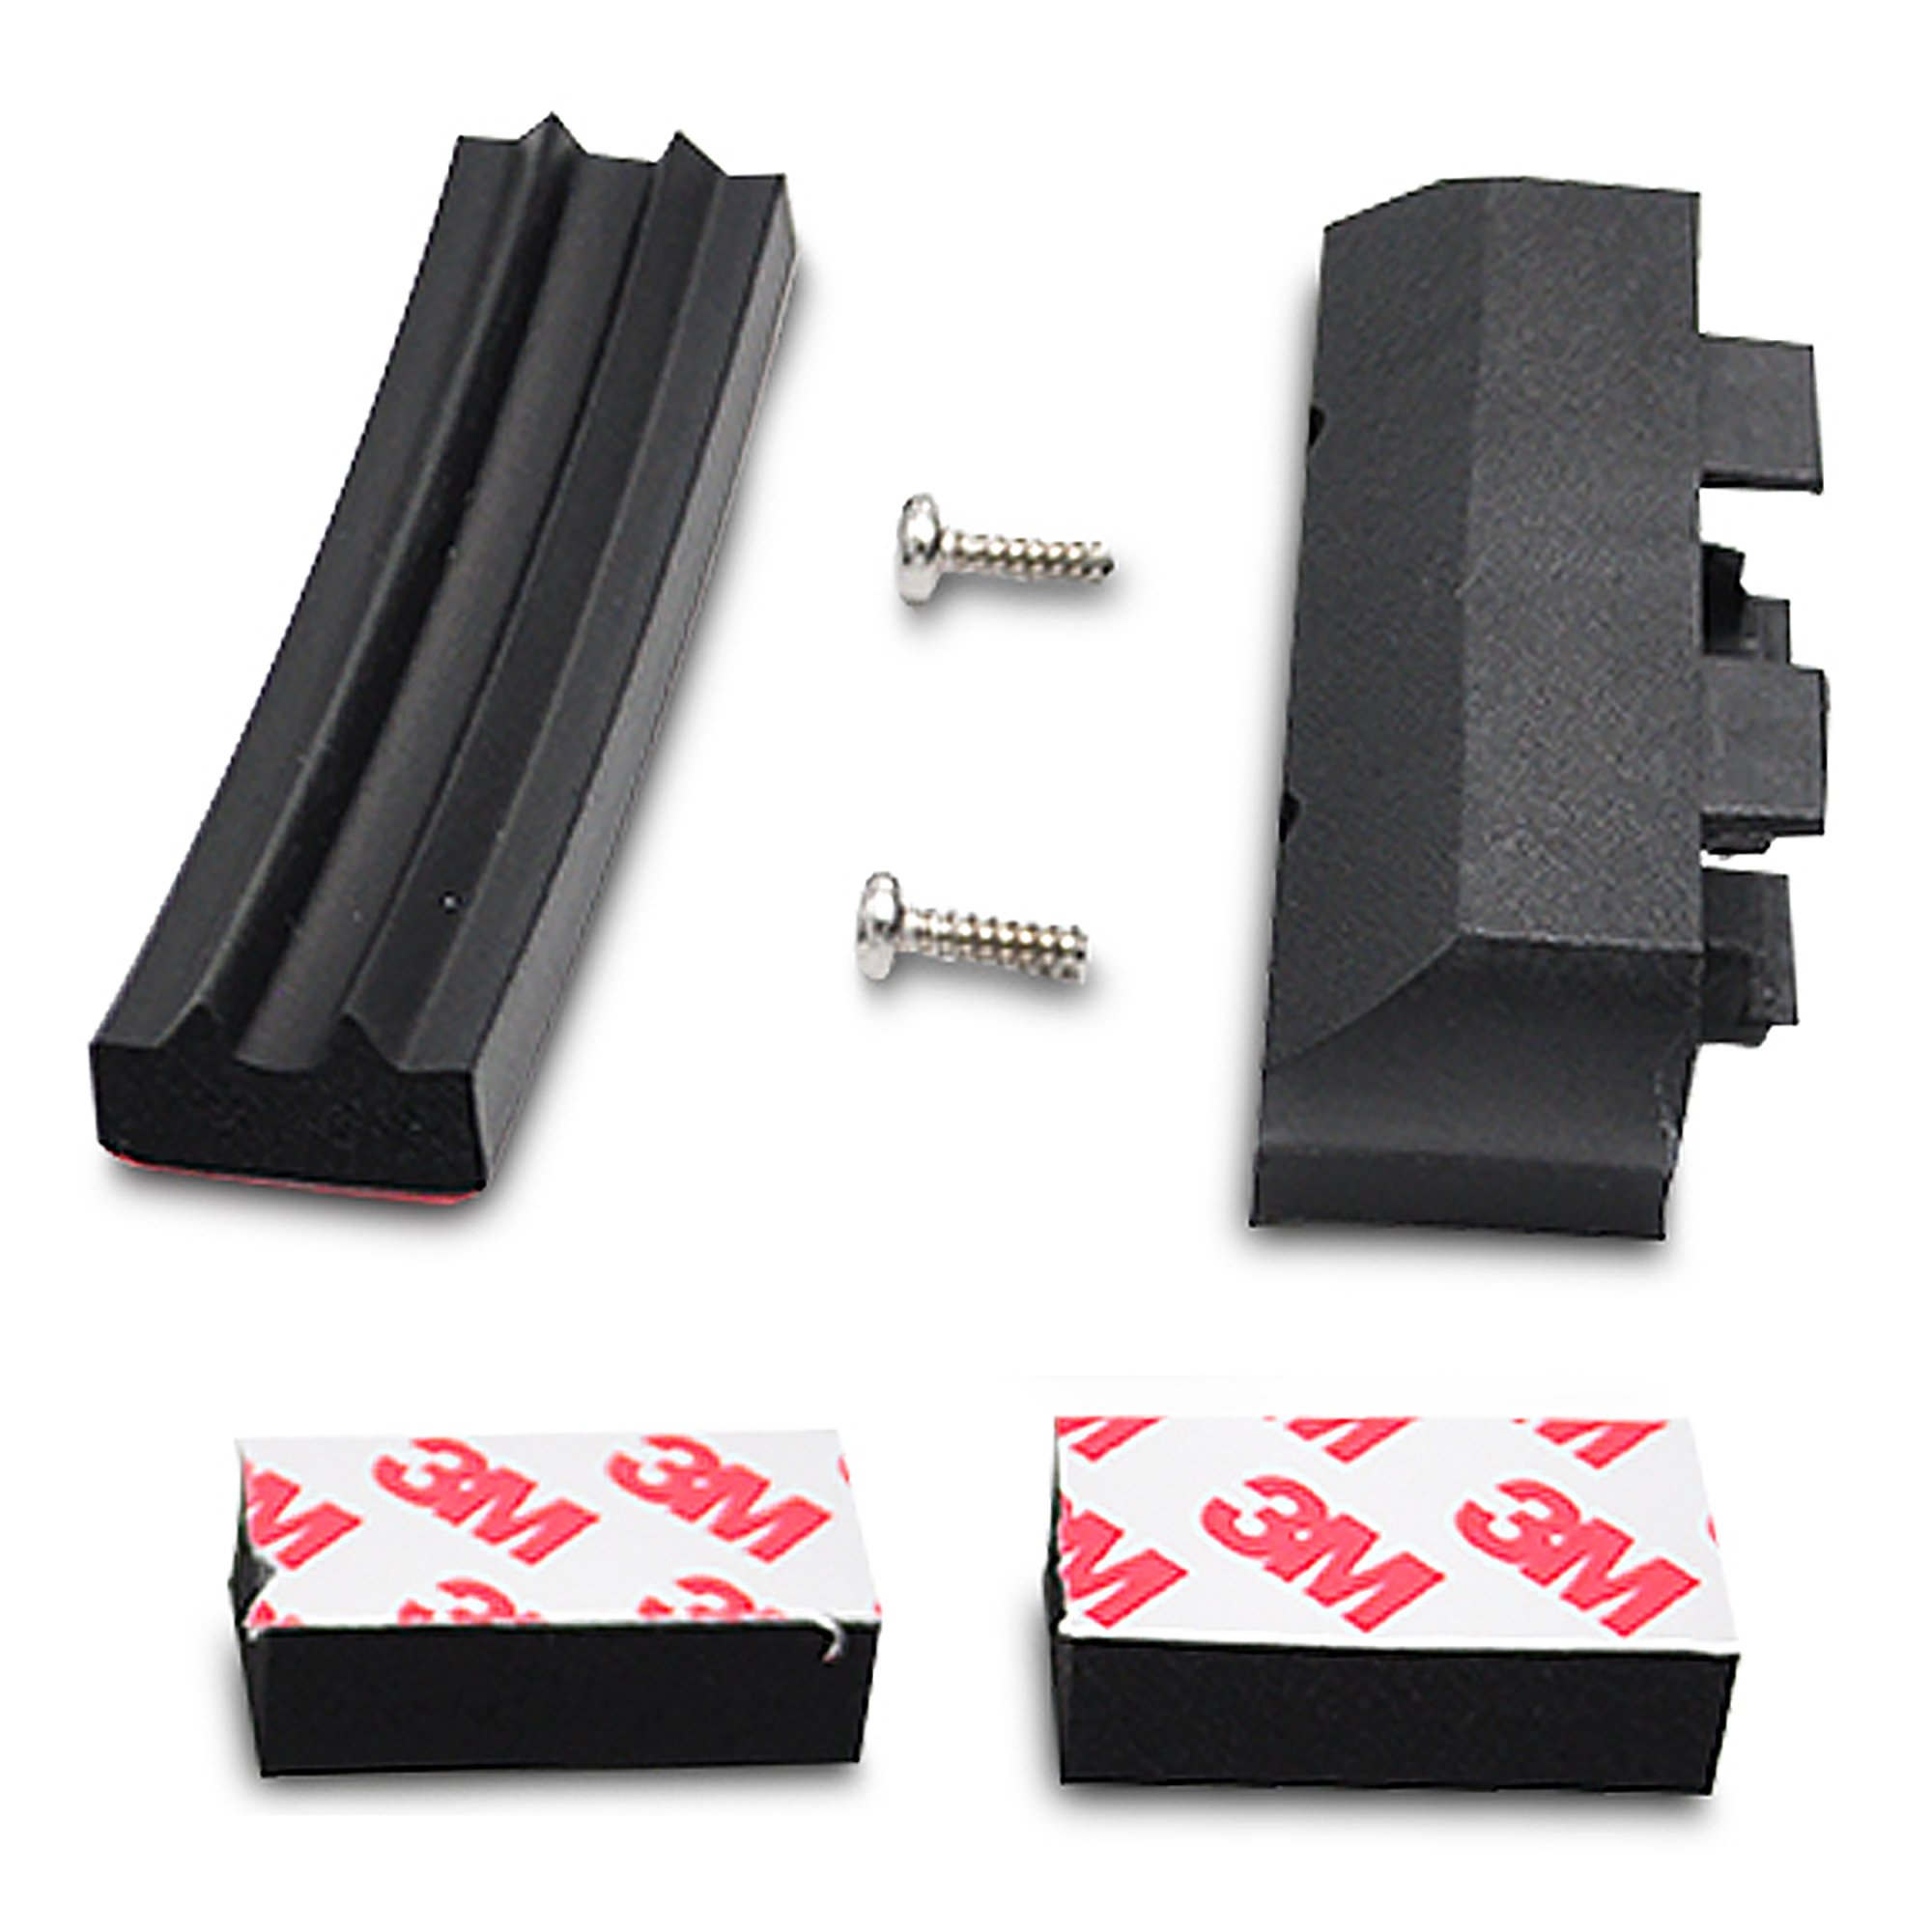 For T5 - Large Hinge Set with Screw x 2, Foam x 2 and Seal | 1 Set | SP-BC5025